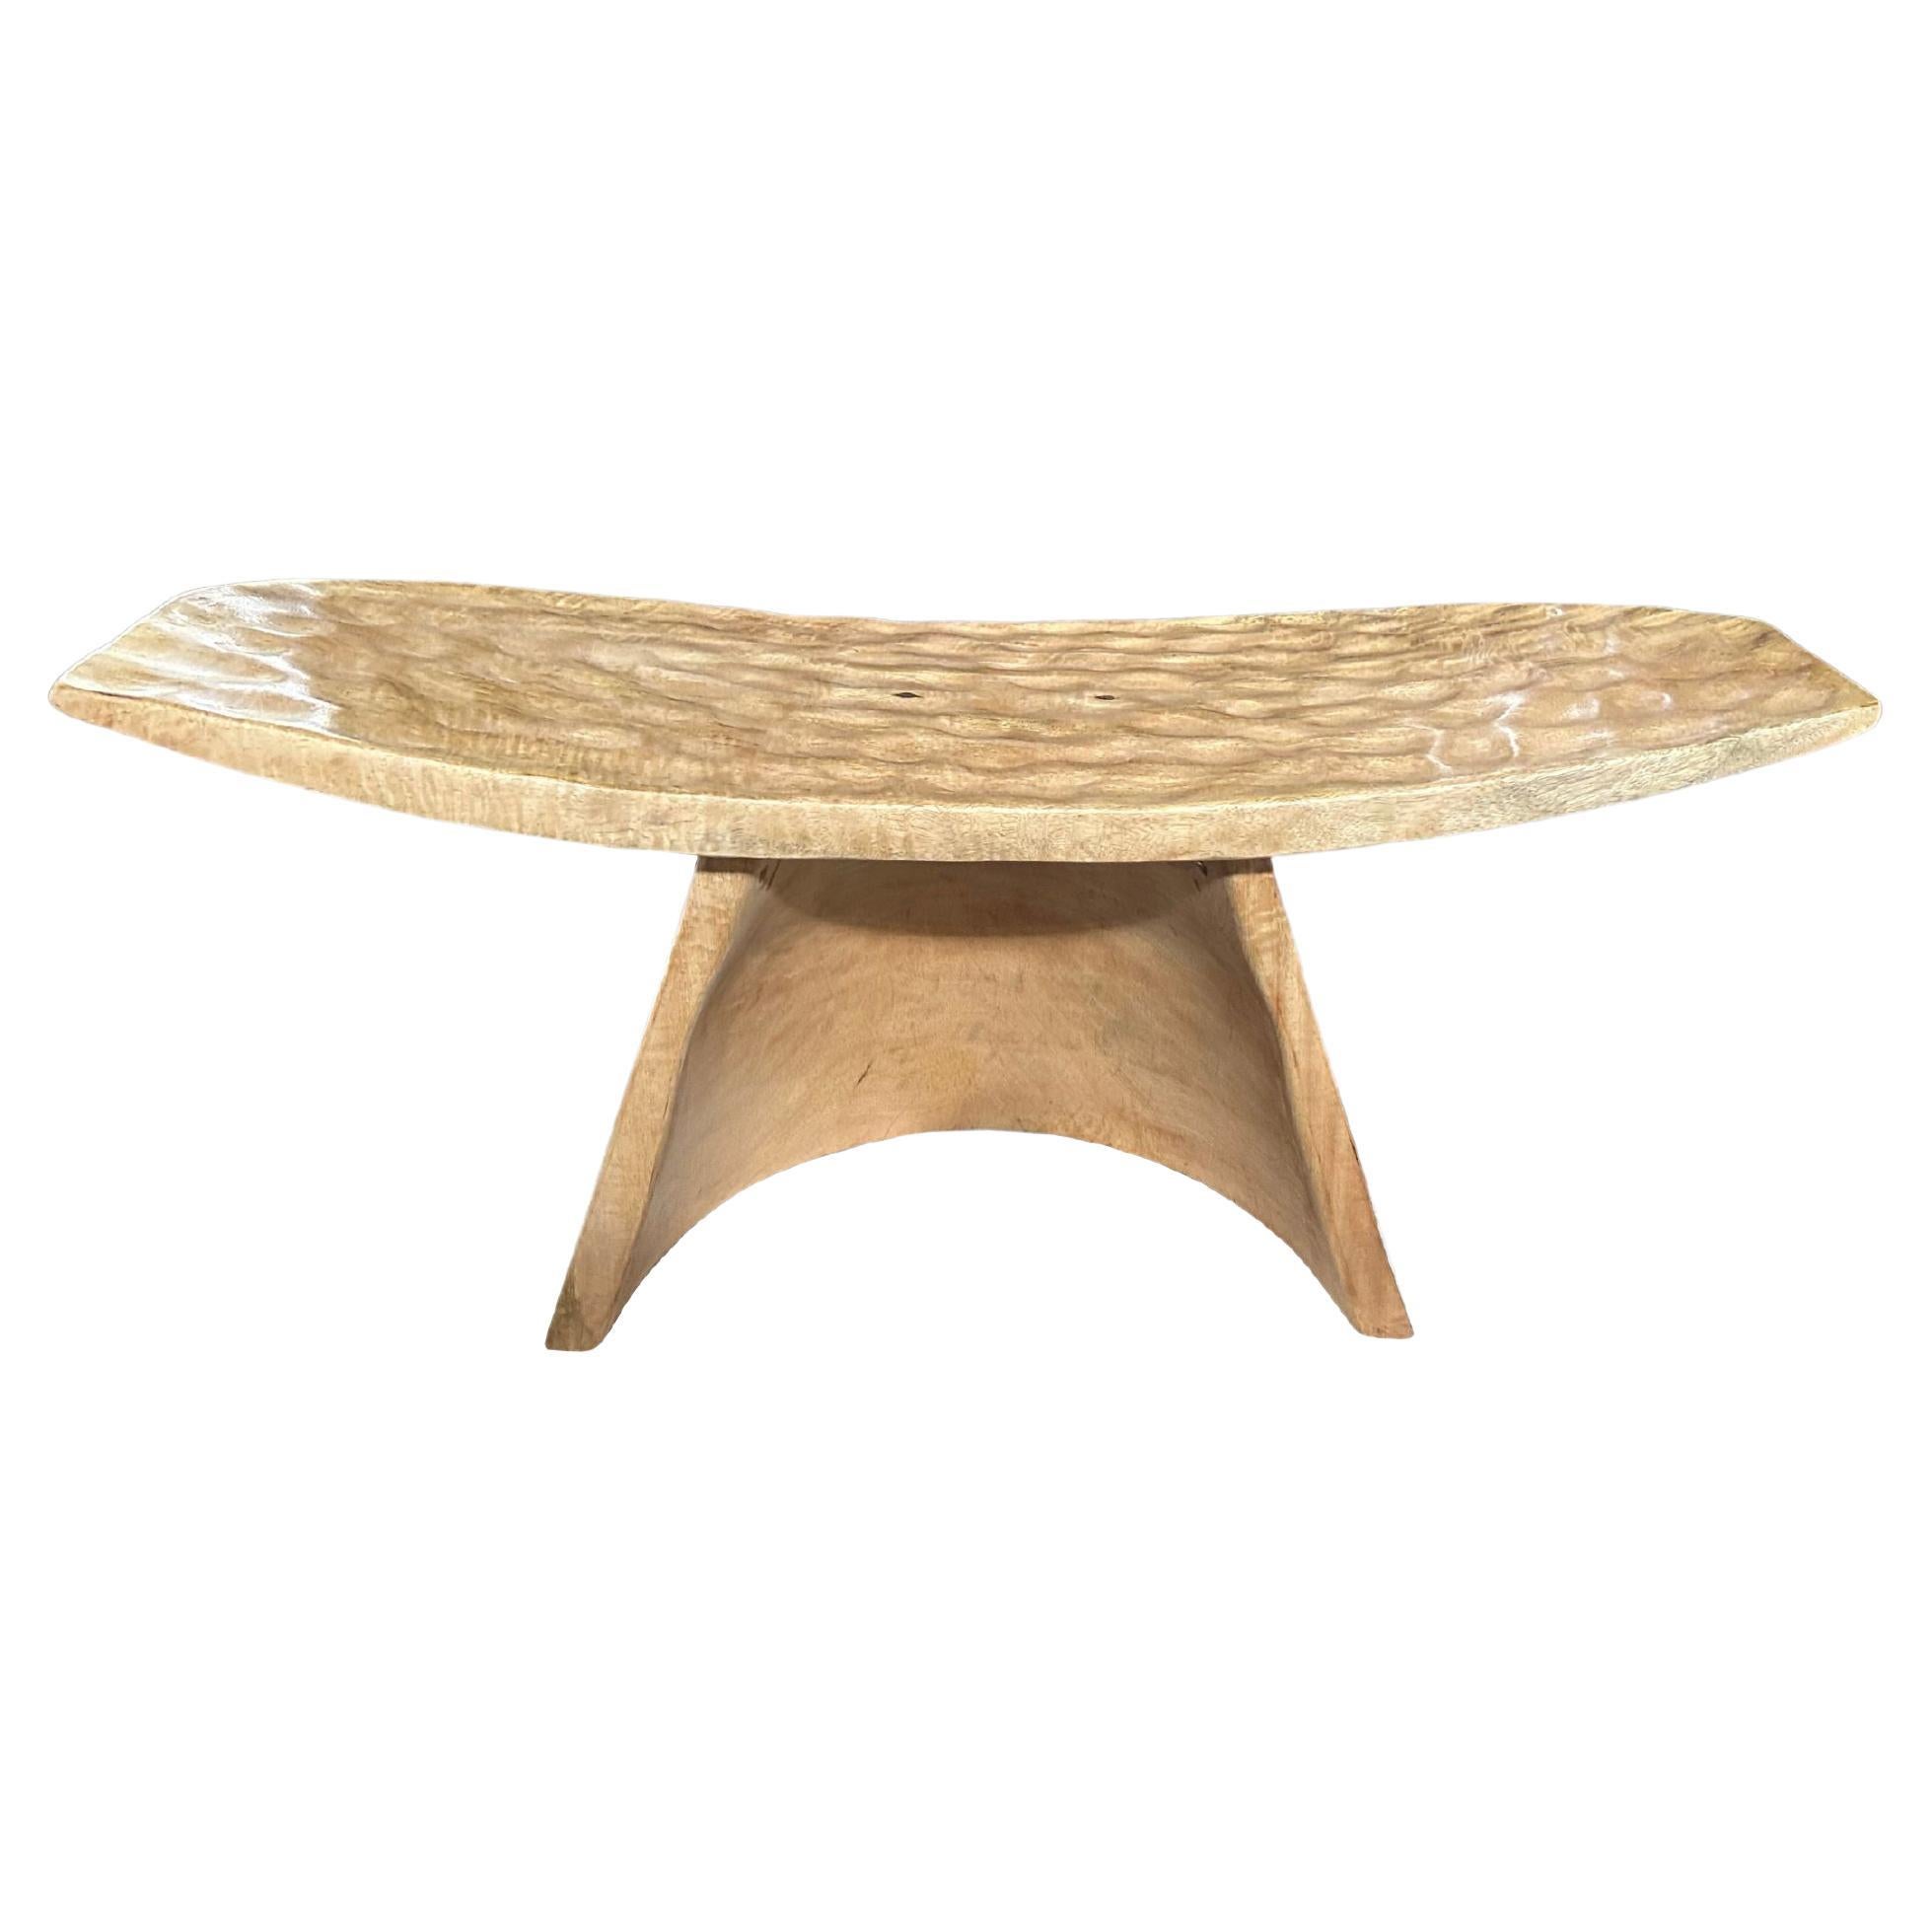 Sculptural Stool with Curved Seat & Hand Hewn Detailing, Natural Finish